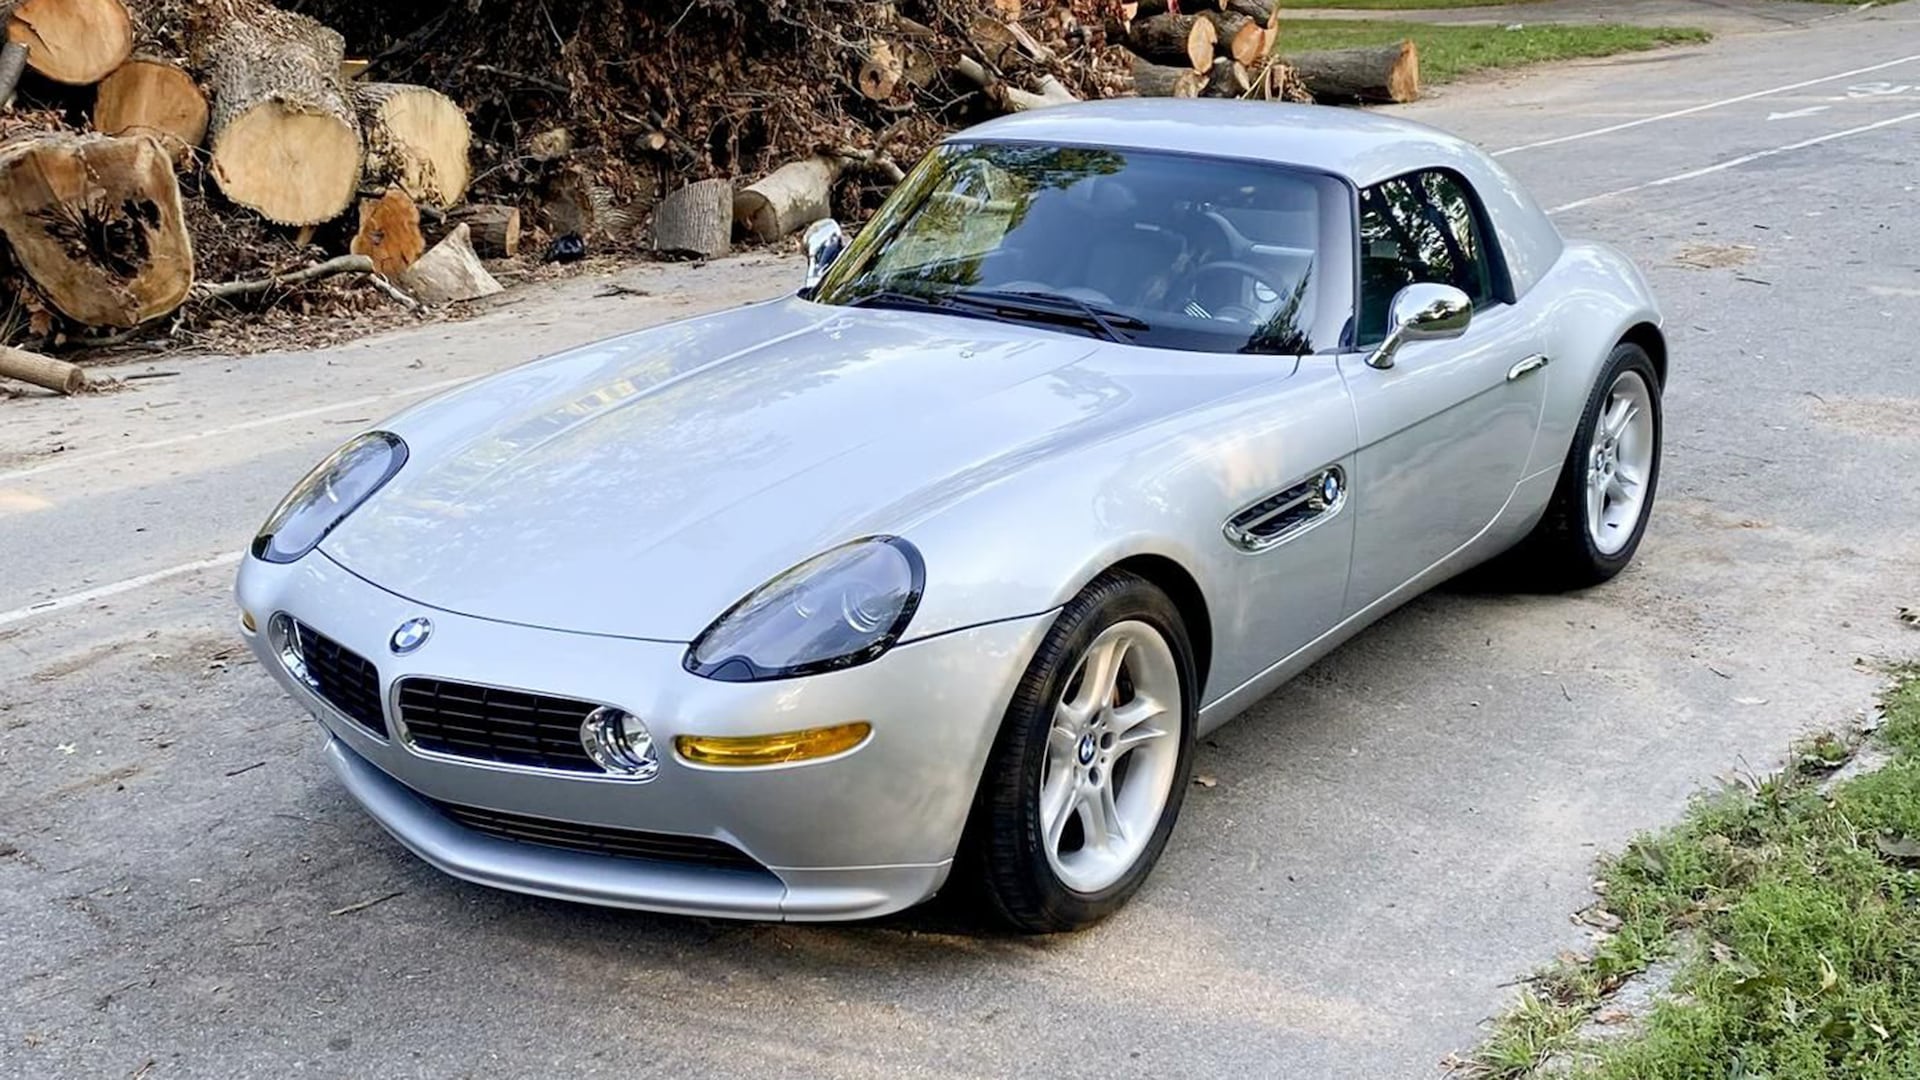 This Gorgeous, Nearly New 2002 BMW Z8 Could Be Yours